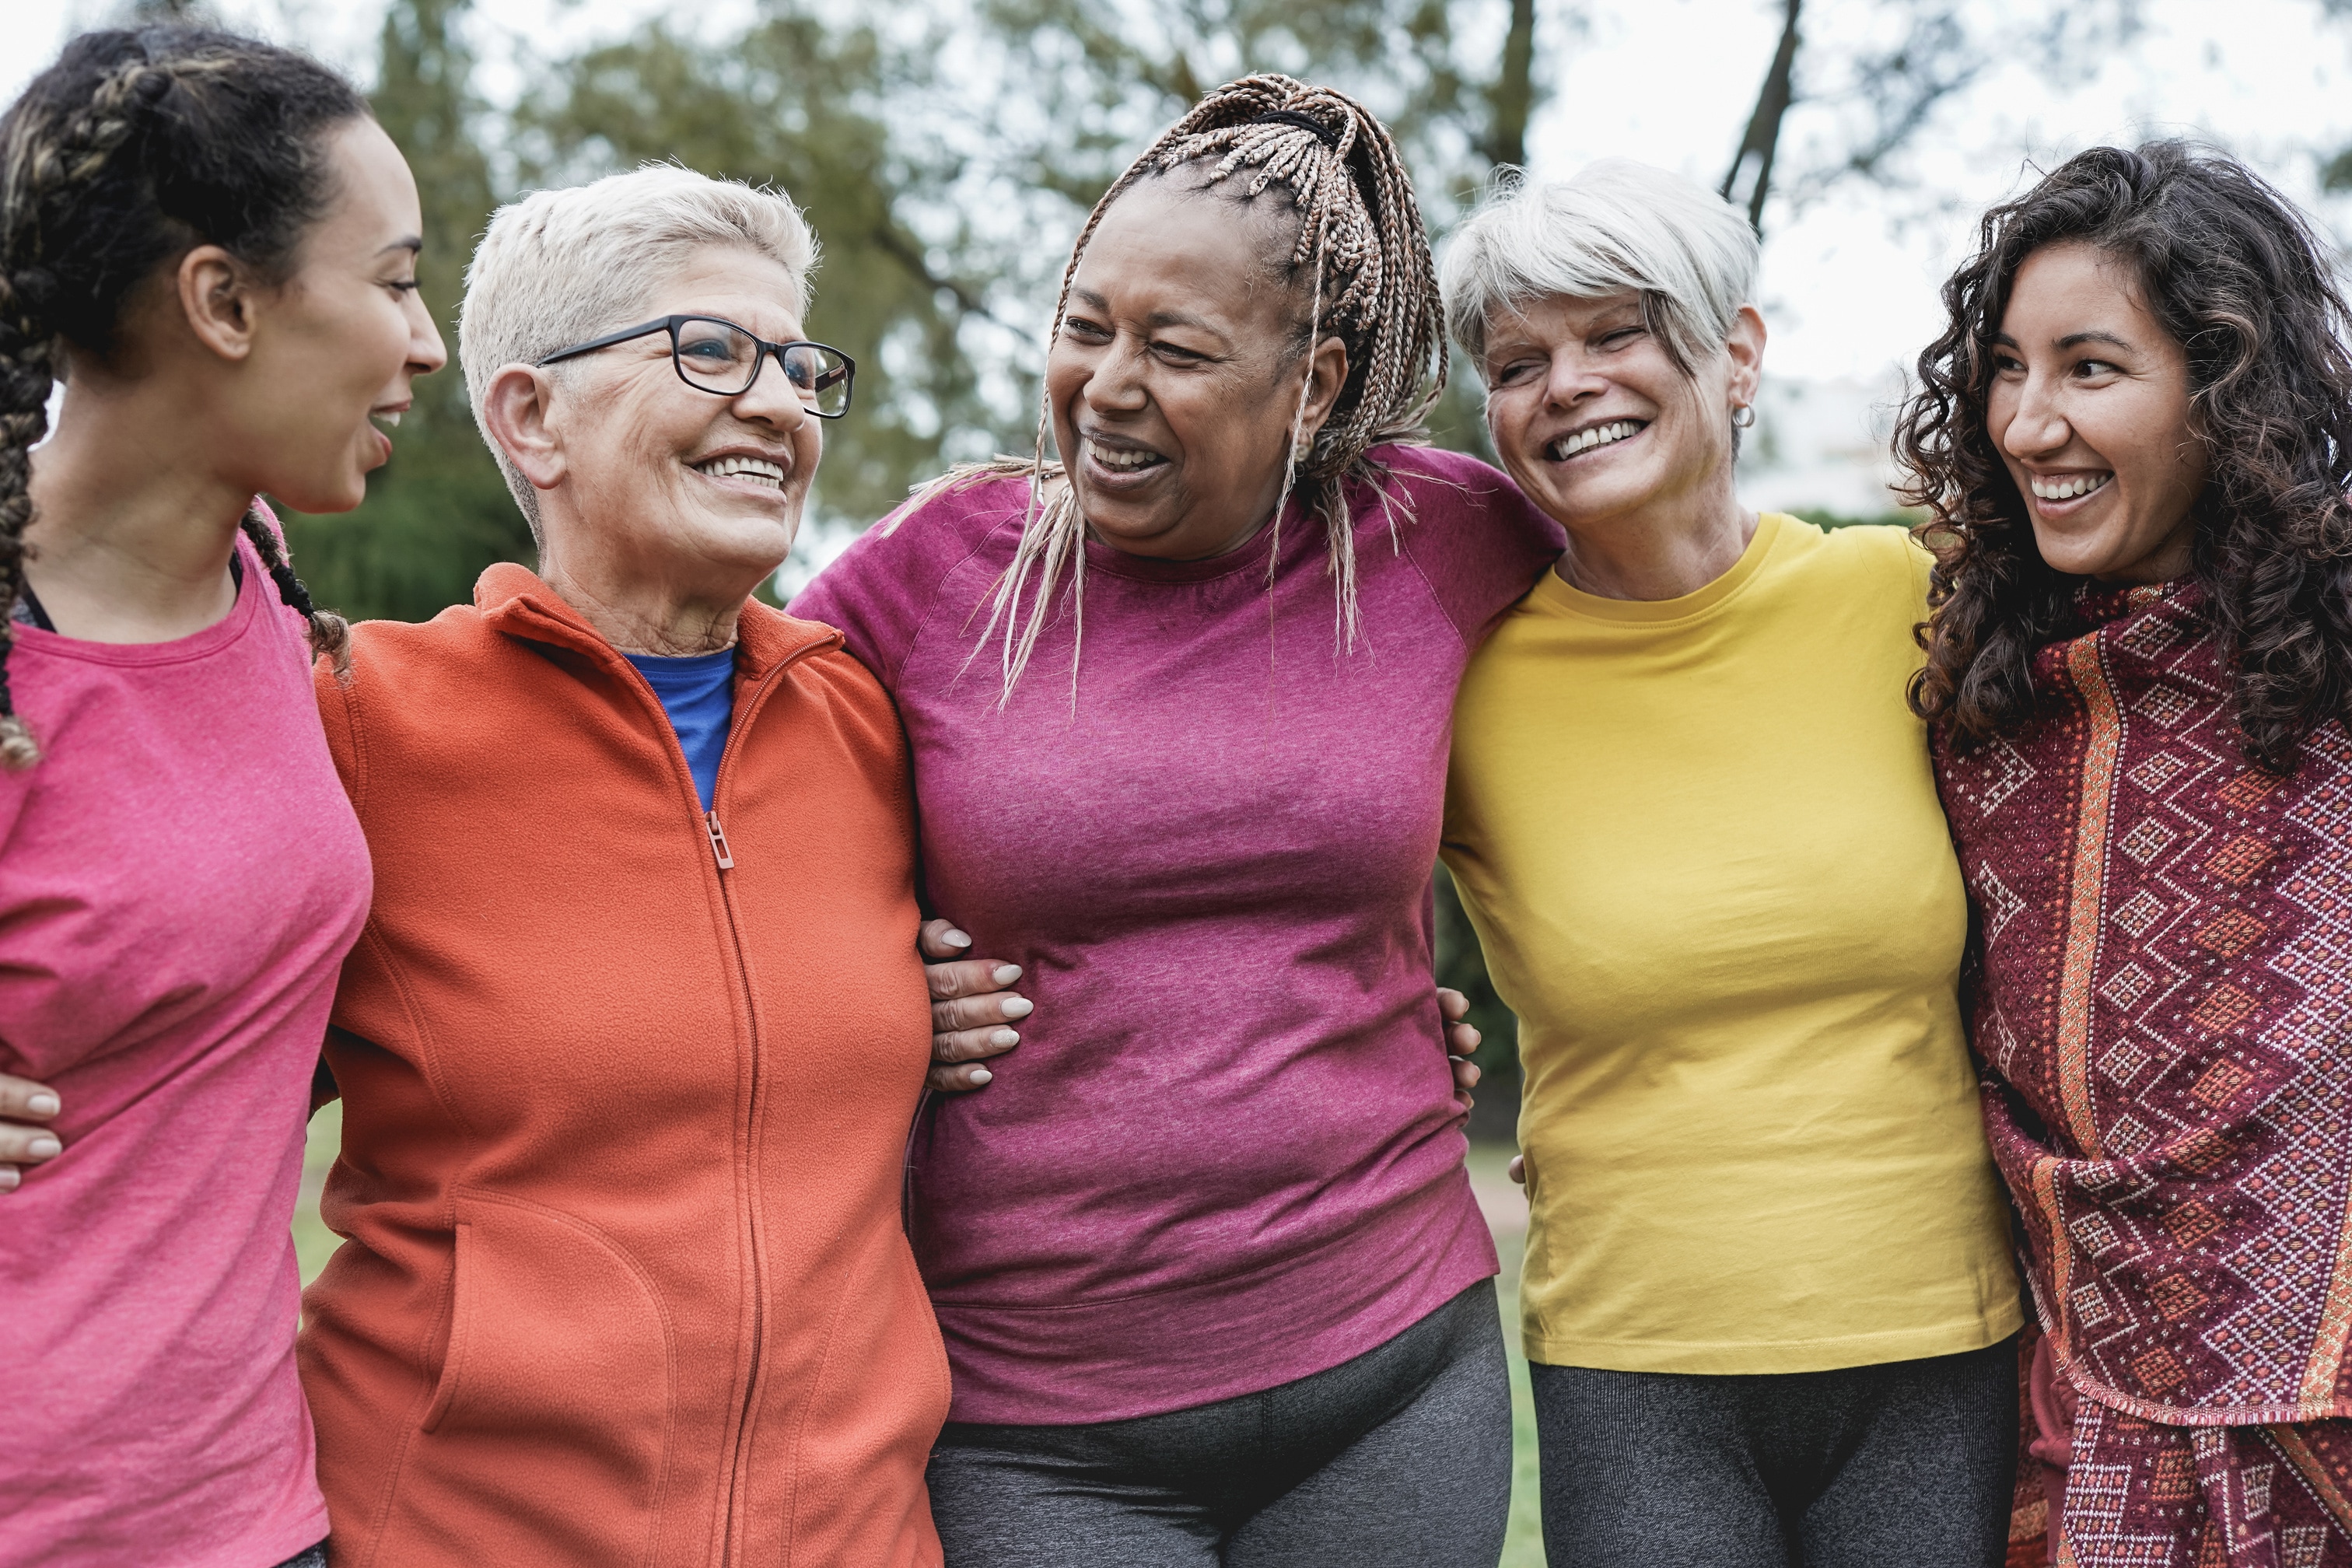 Five women of different backgrounds and different ages have their arms around each other outside. They are all smiling together.